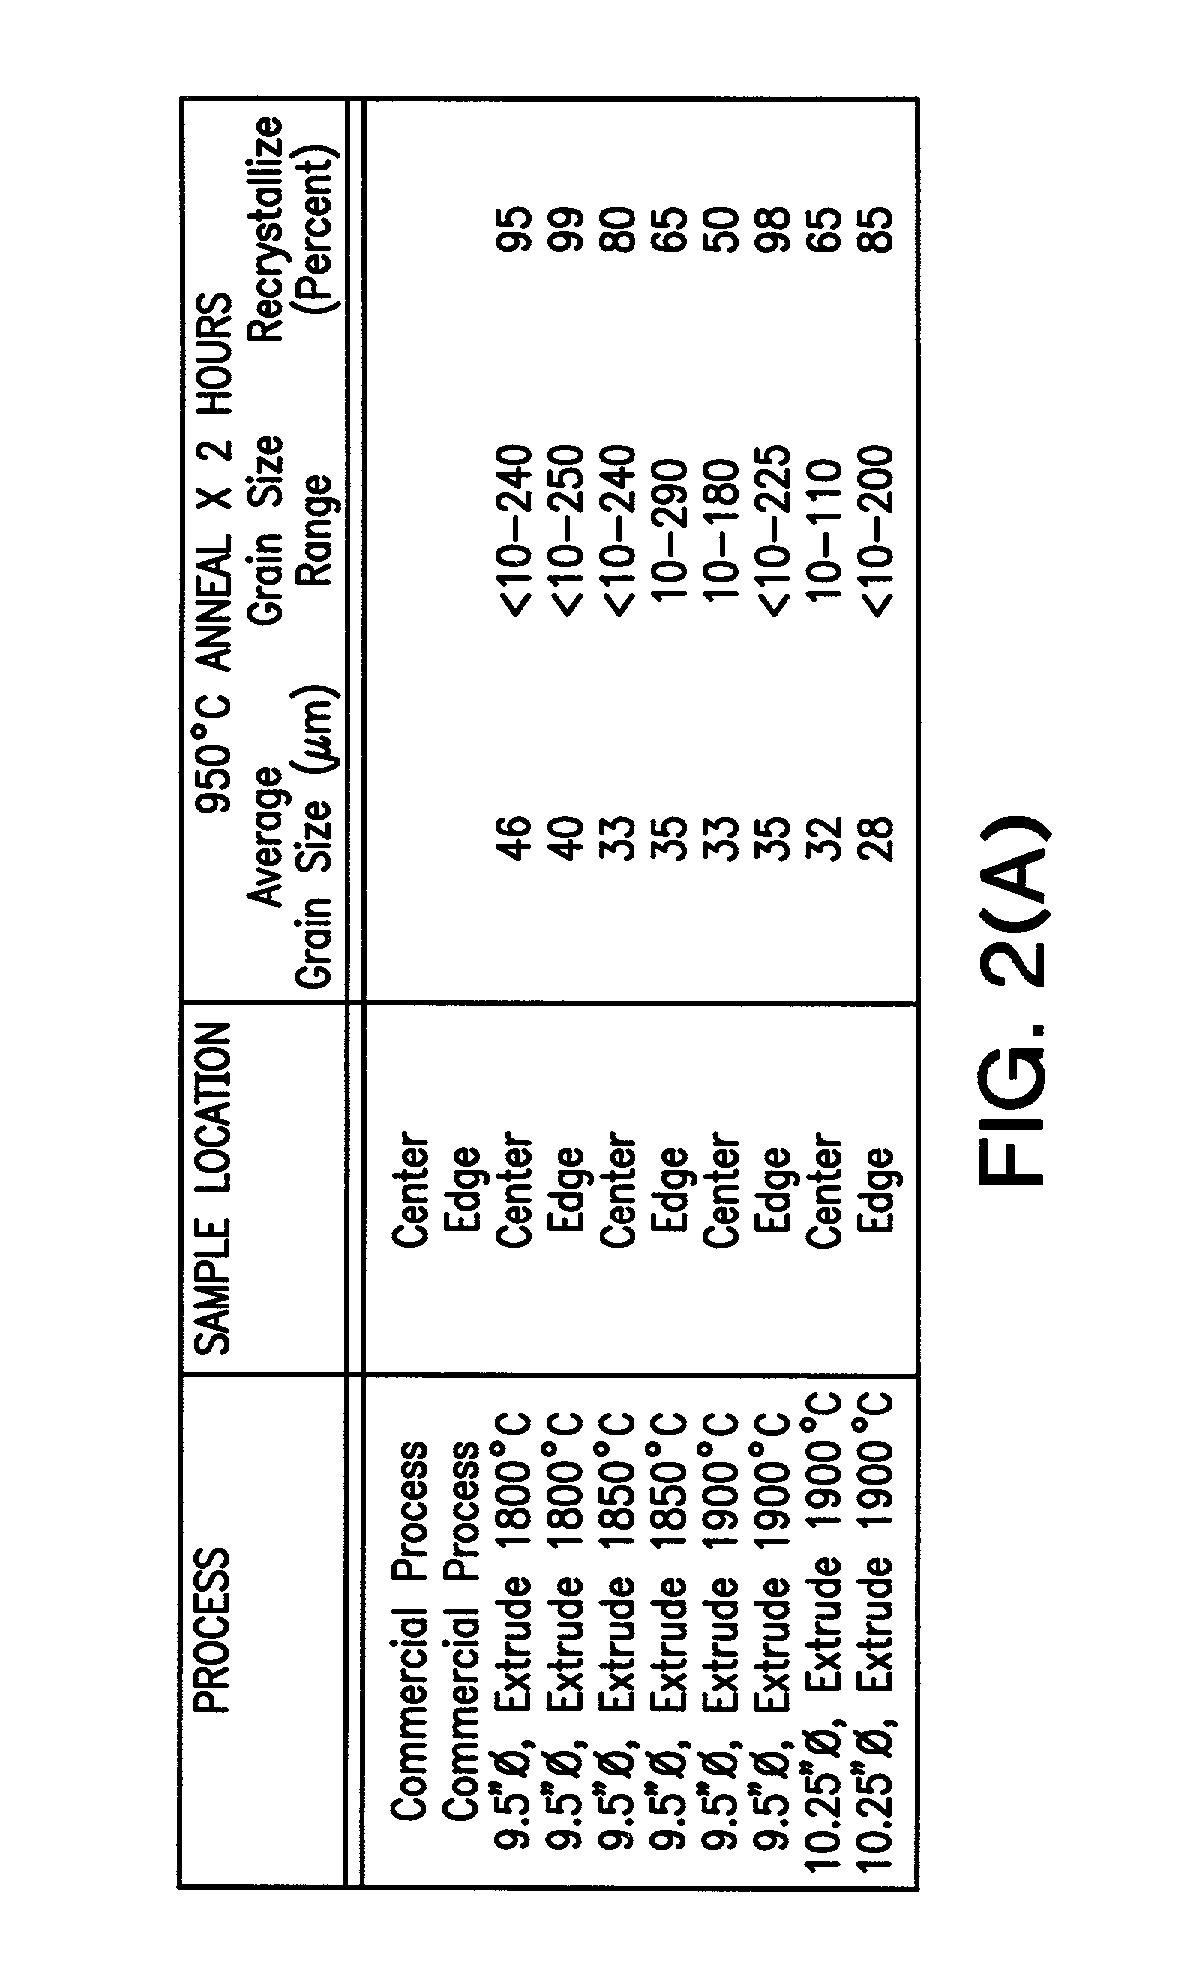 Tantalum and niobium billets and methods of producing the same